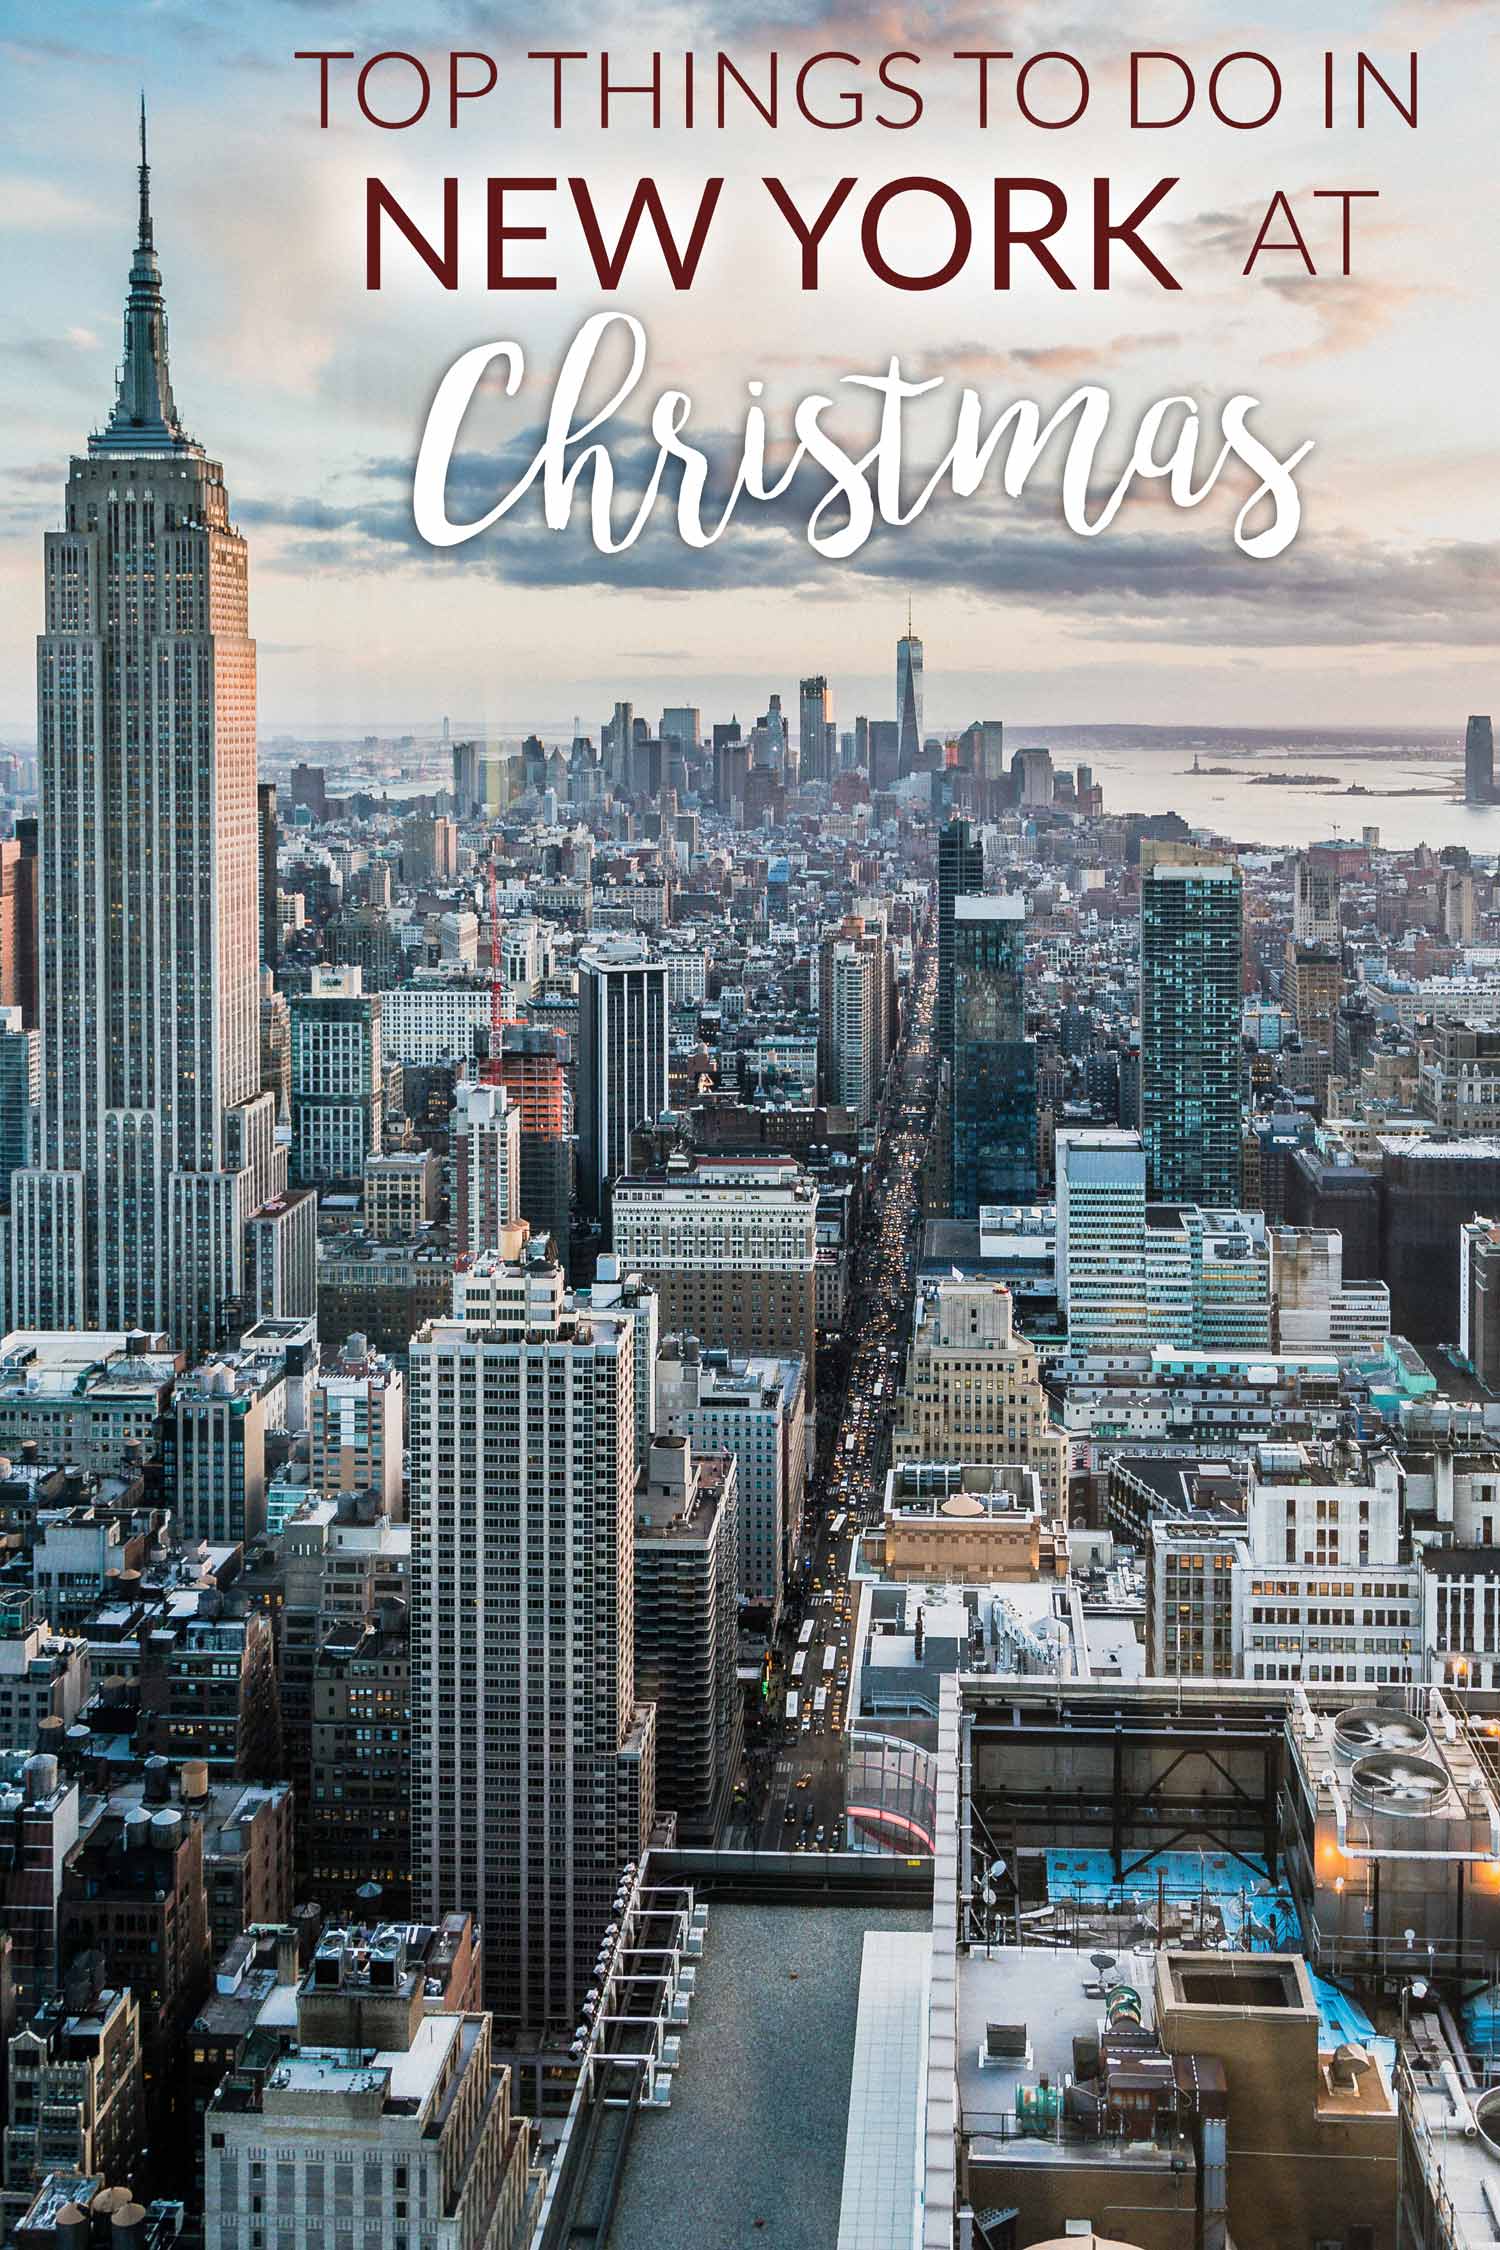 Top Things to do in New York at Christmas